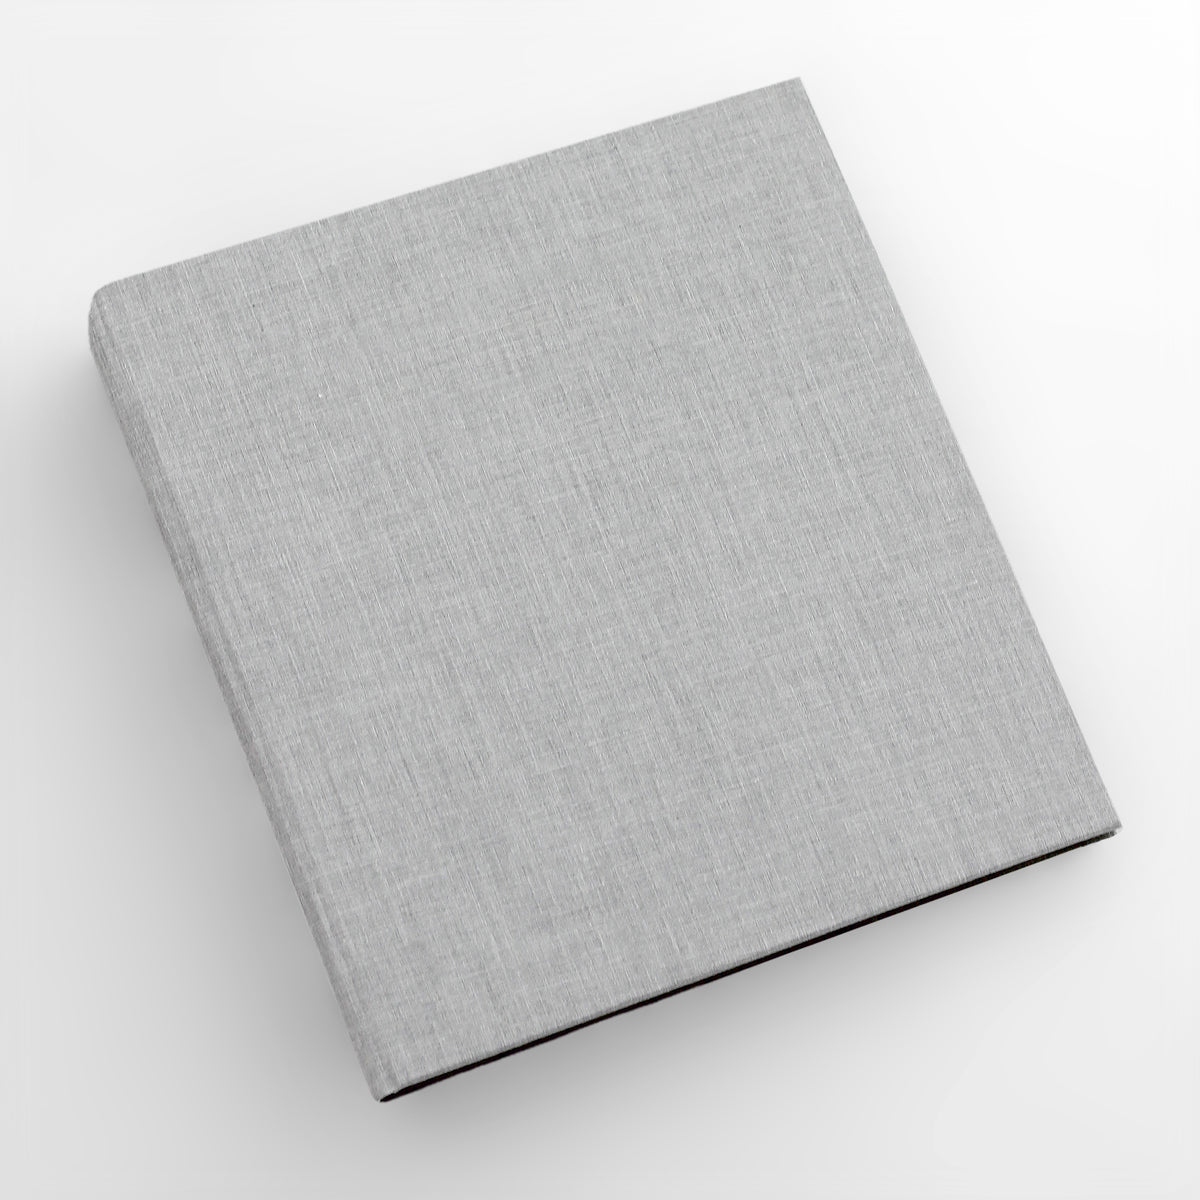 Large Photo Binder | for 8x10 Photos | with Dove Gray Cotton Cover